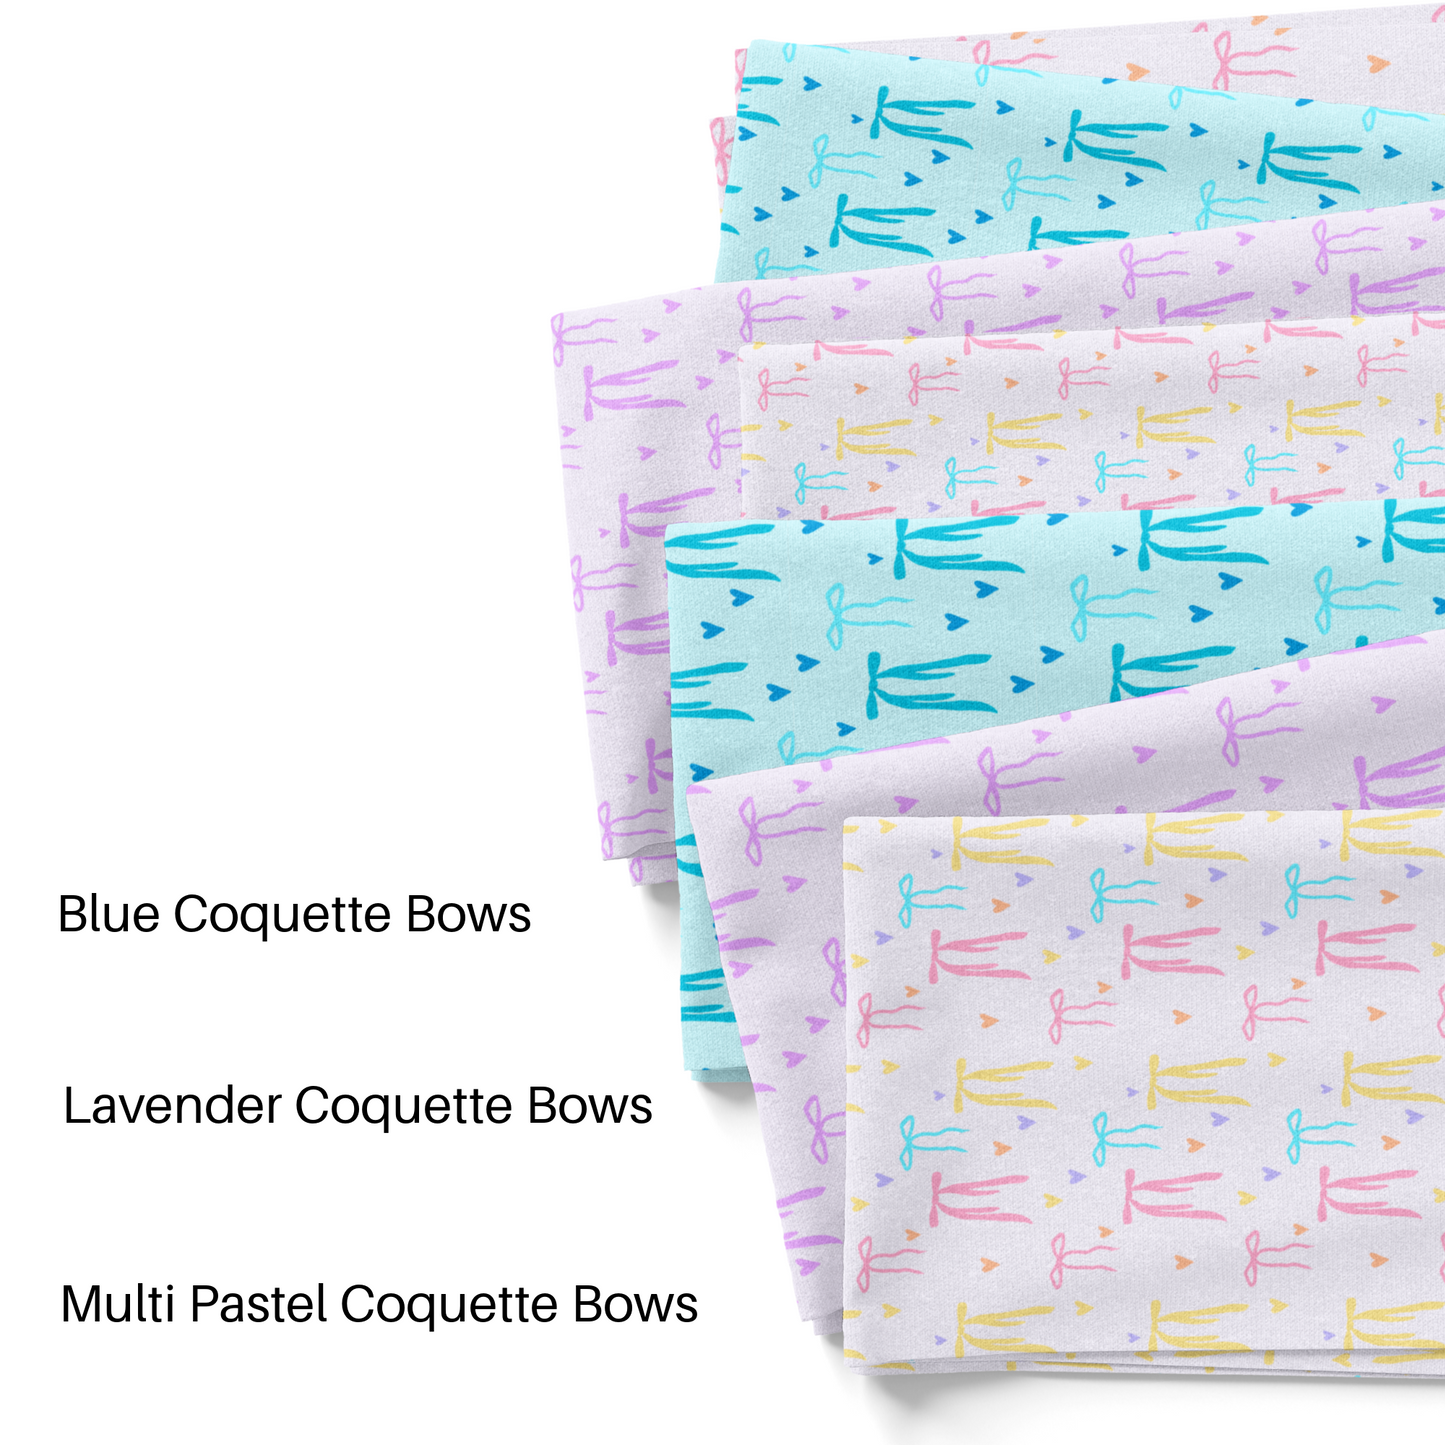 Lavender Coquette Bows Fabric By The Yard